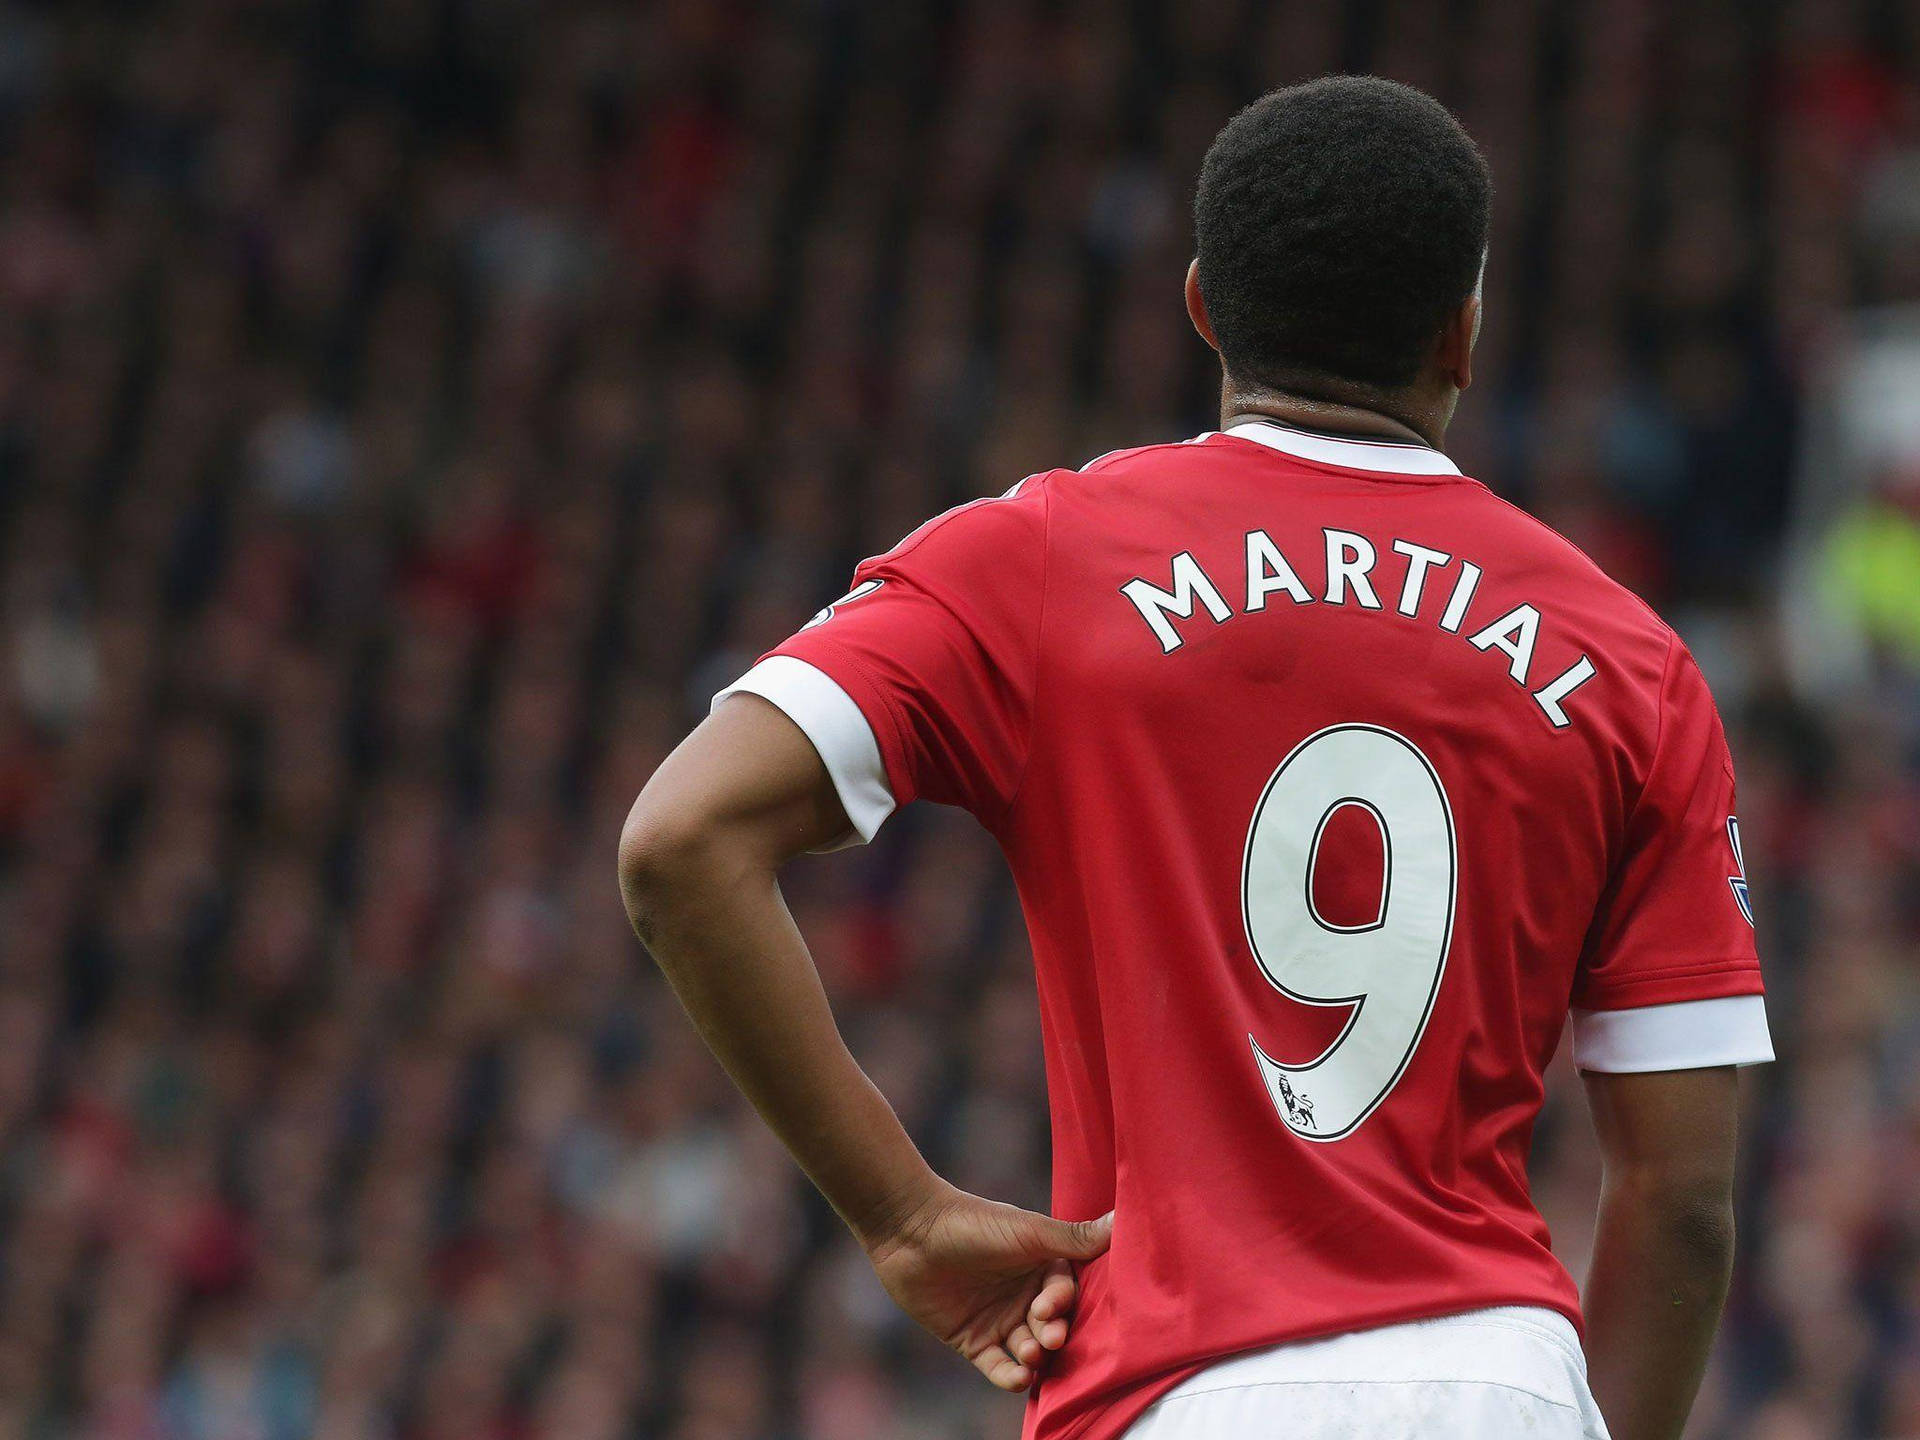 Anthony Martial  Manchester United Wallpapers